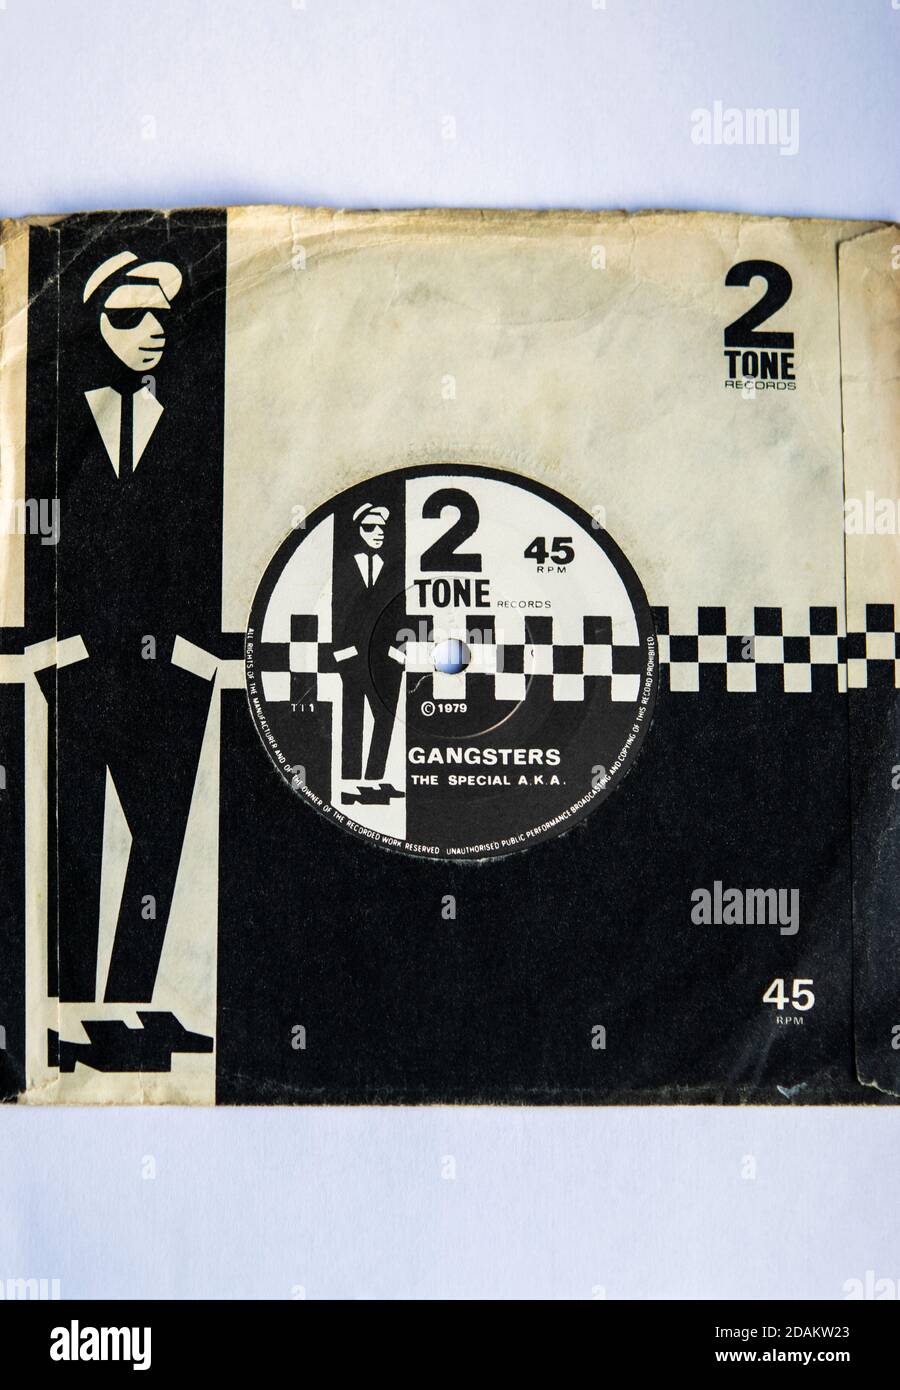 Seven inch vinyl single version of Gangsters by The Special AKA, released on the 2 Tone label in 1979 Stock Photo